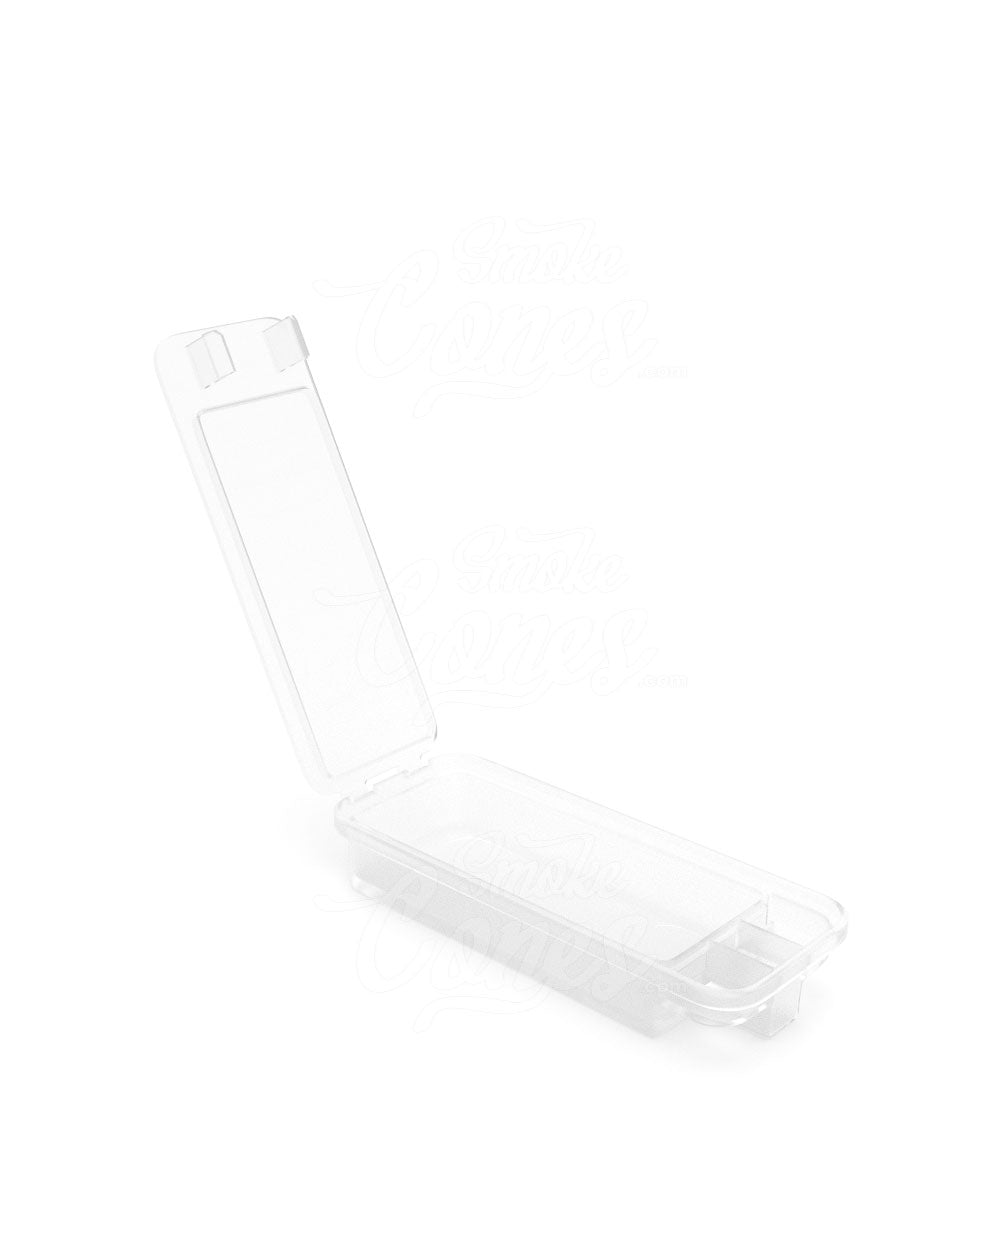 70mm Pollen Gear Clear SnapTech Child Resistant Edible & Pre-Roll Small Joint Case 240/Box - 1